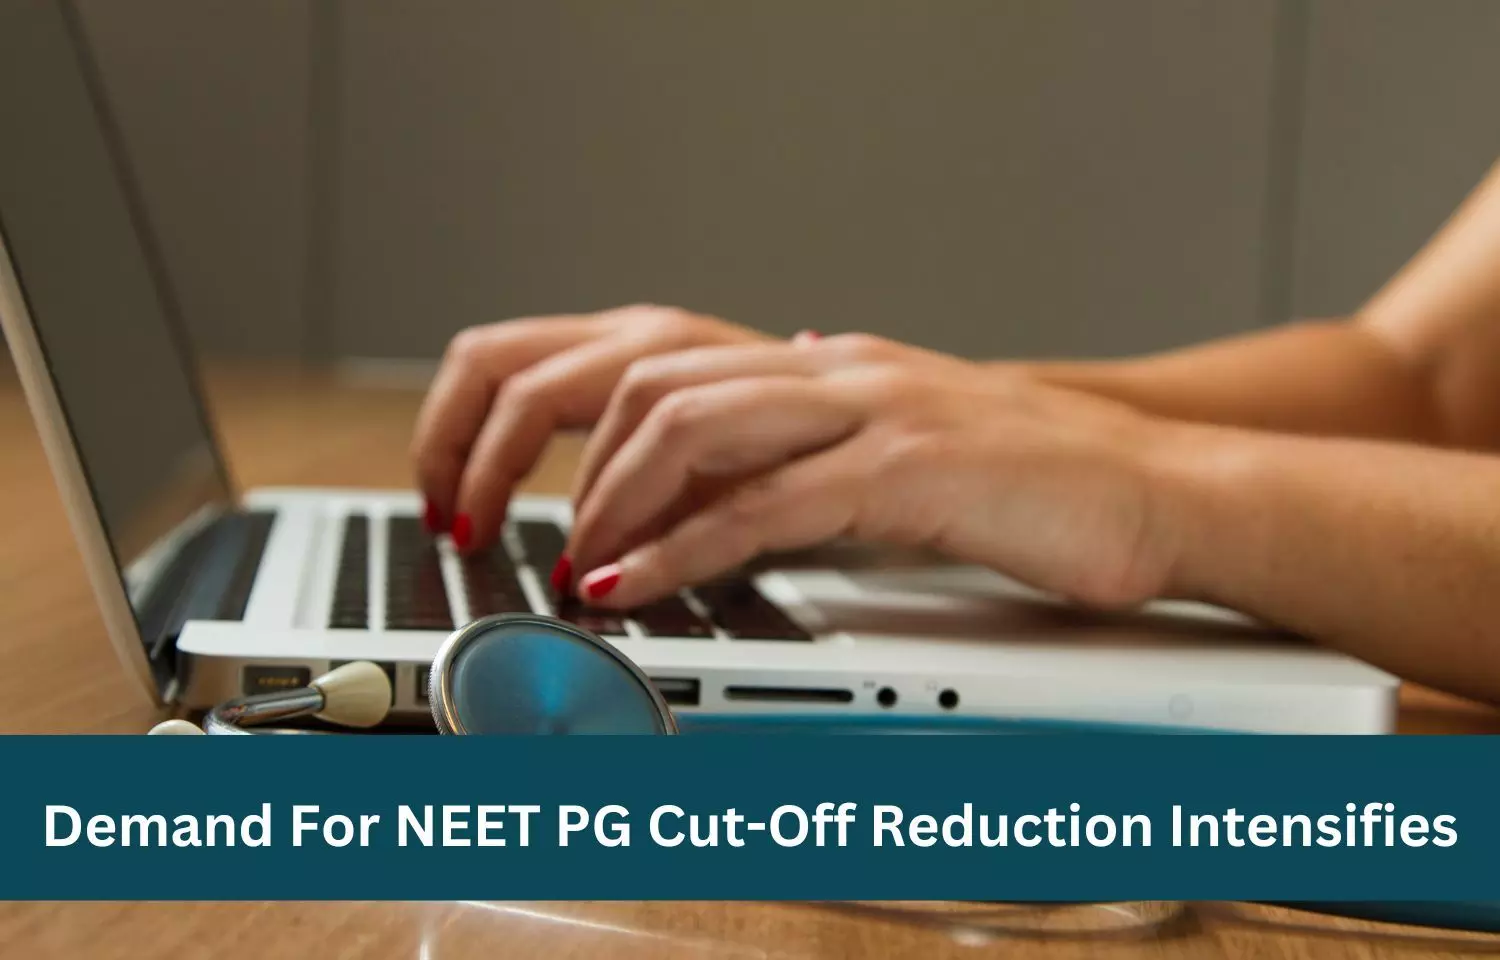 Escalation in demand for NEET PG cut off reduction